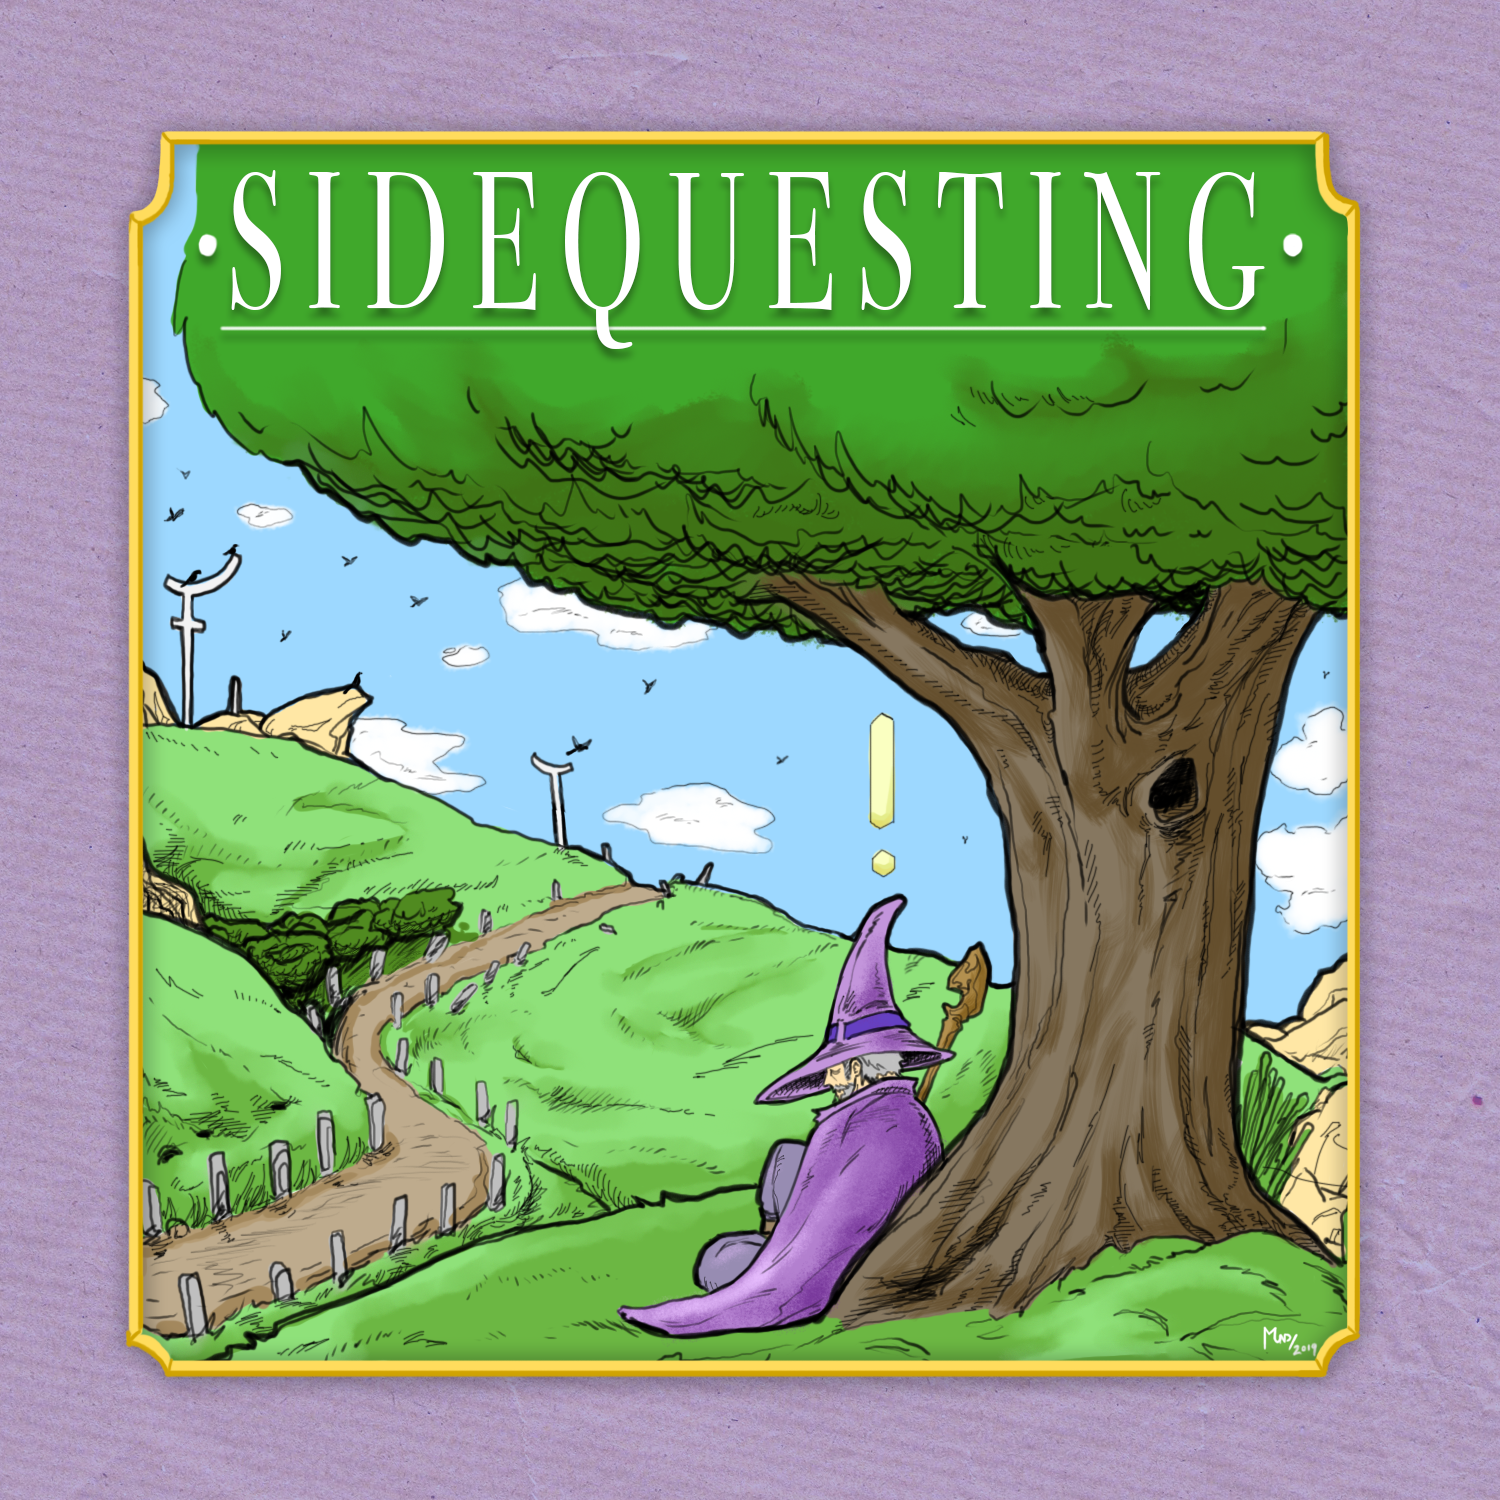 The Sidequesting cover art - a digital drawing of a wizard in purple robes sitting underneath a tree with a video game quest marker above his head.